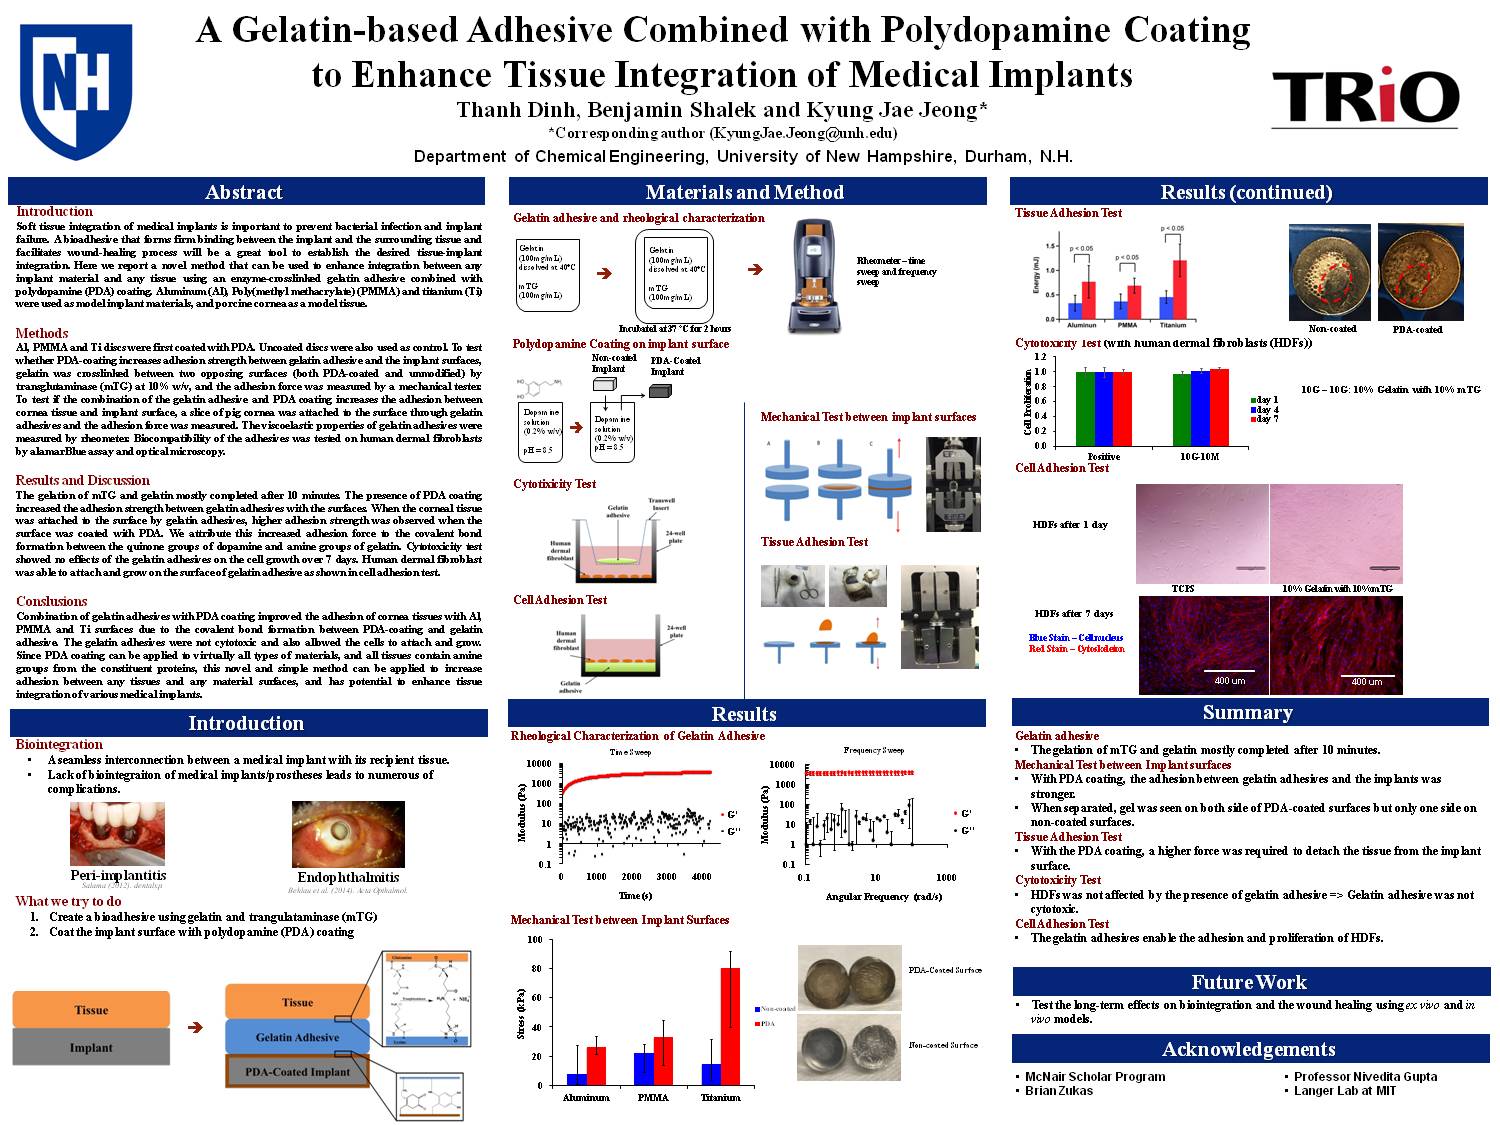 A Gelatin-Based Adhesive Combined With Polydopamine Coating To Enhance The Tissue Integration Of Medical Implants by tnd1